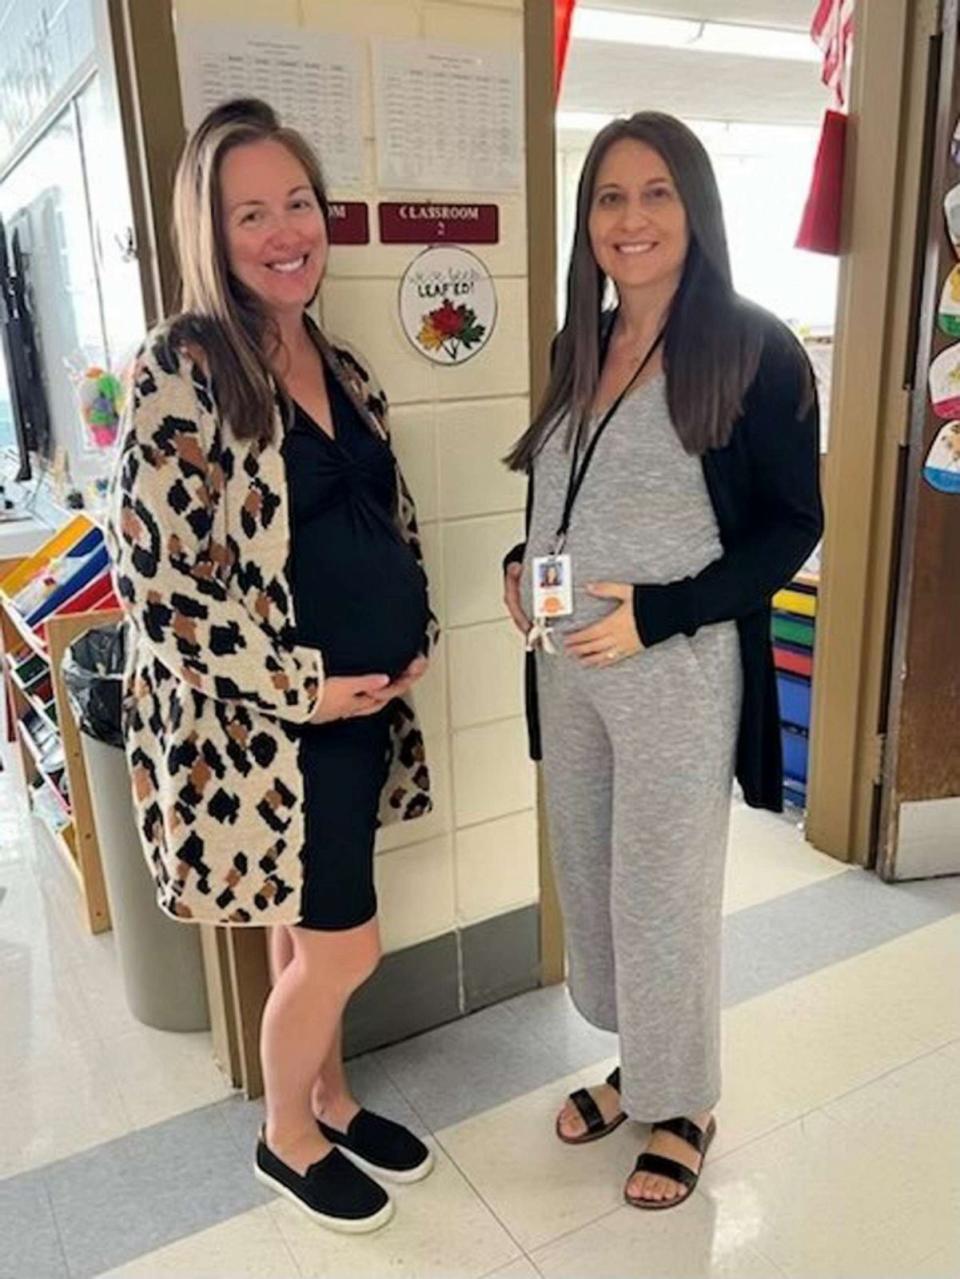 PHOTO: Amanda Dempsey poses with a fellow kindergarten teacher pregnant at the same time at Long Hill Elementary School in Connecticut. (Amanda Dempsey)